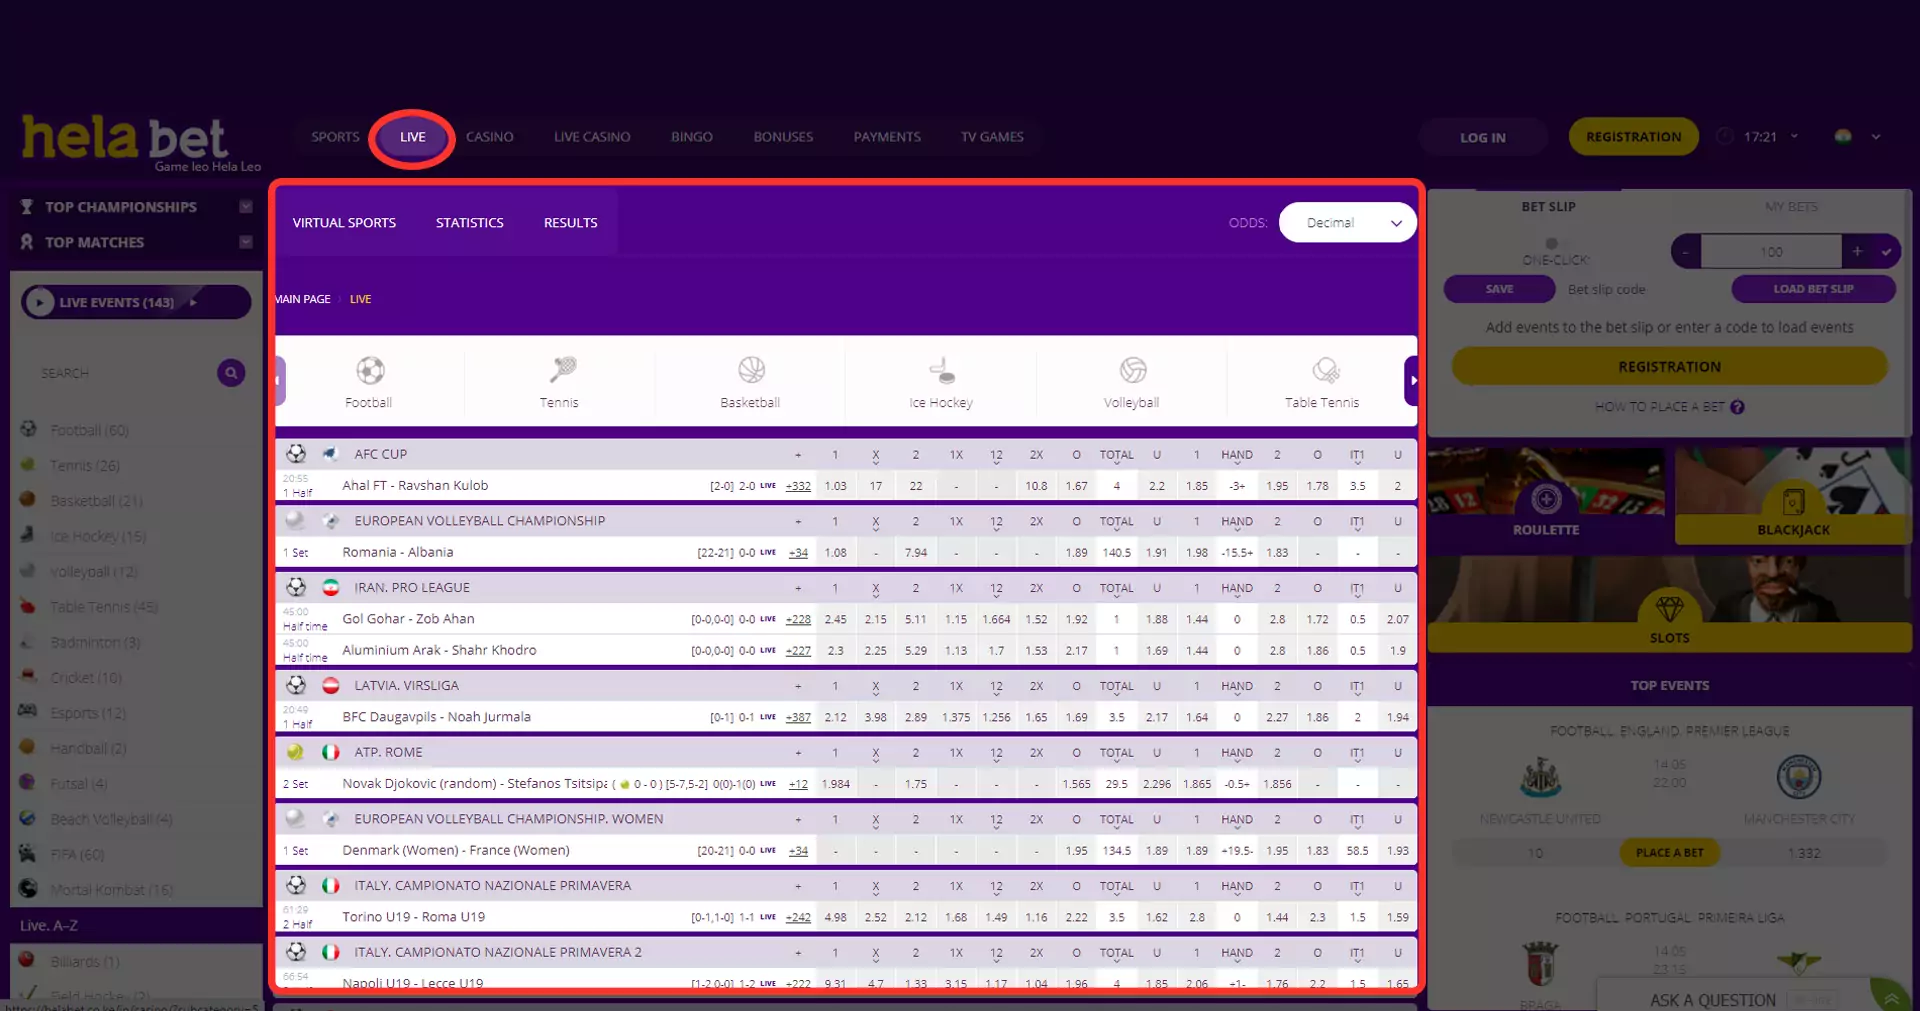 Users from India can bet in real time at Helabet.